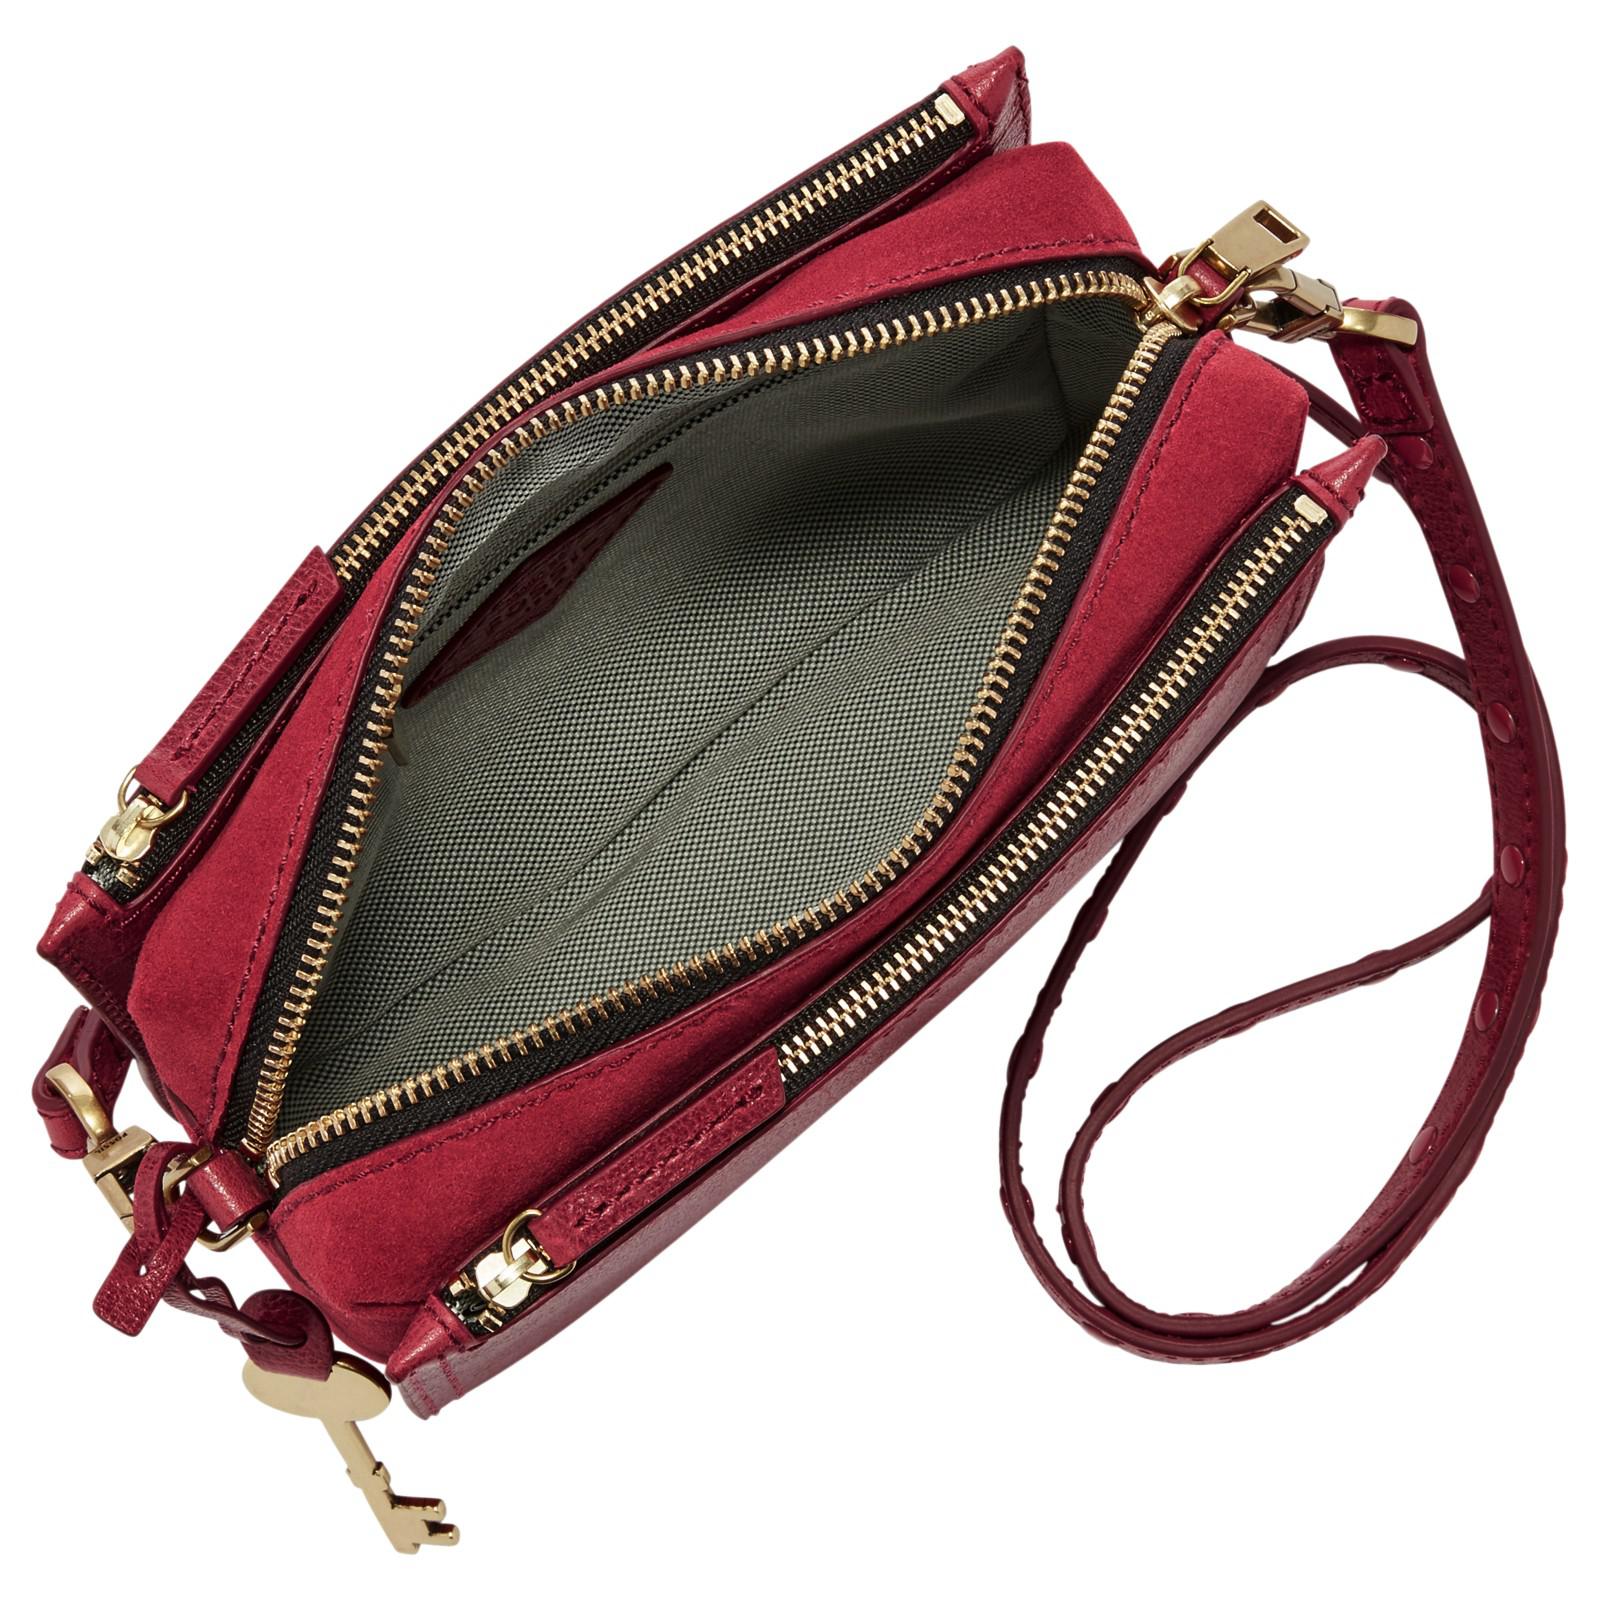 Fossil Campbell Leather Cross Body Bag in Red - Lyst